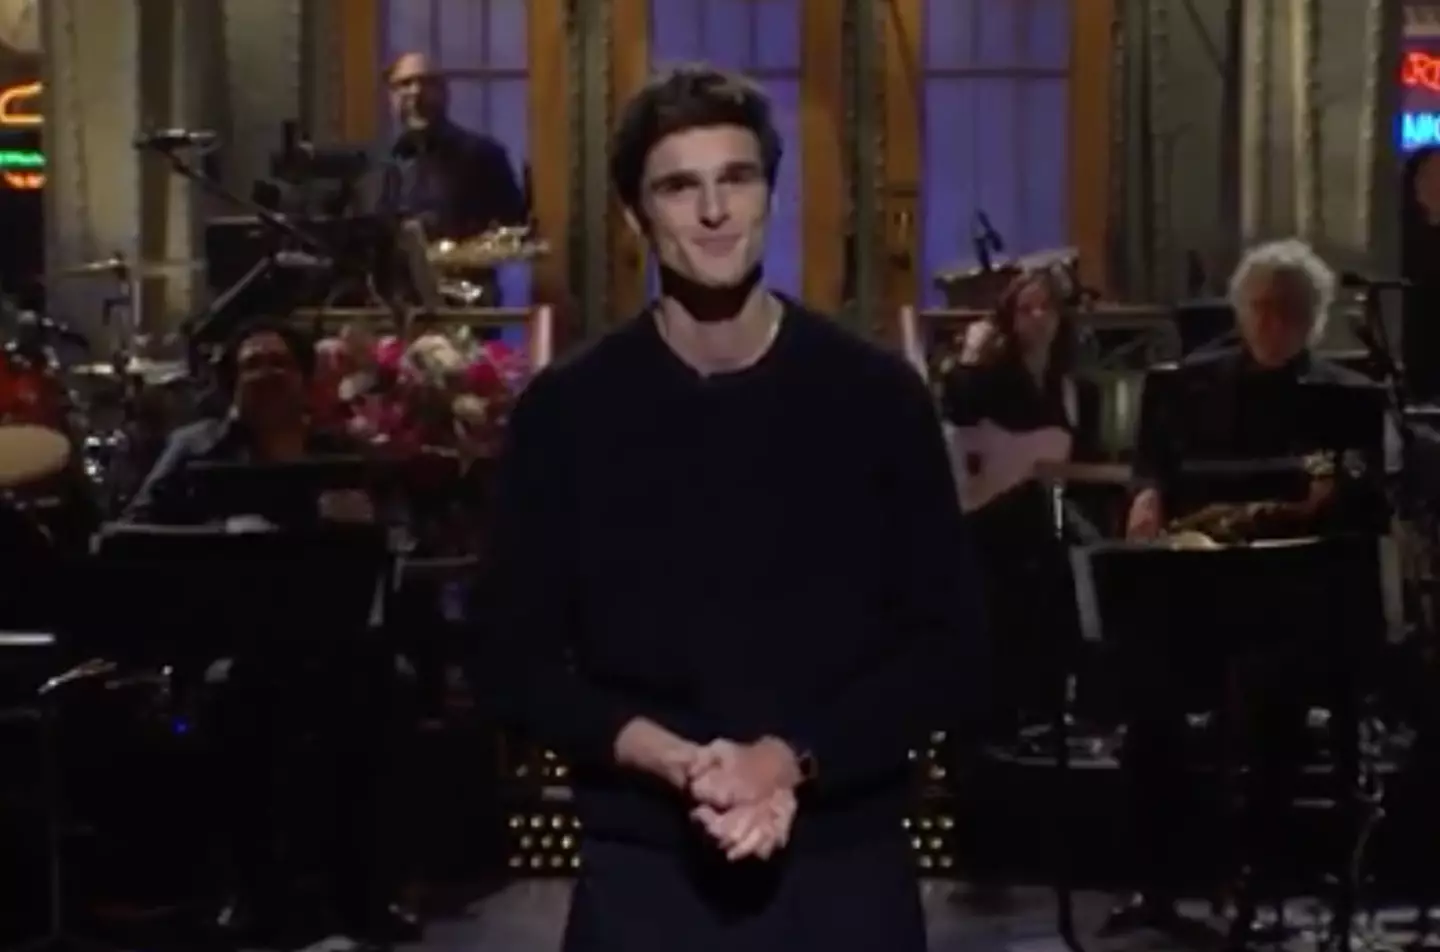 Jacob Elordi recently hosted Saturday Night Live.